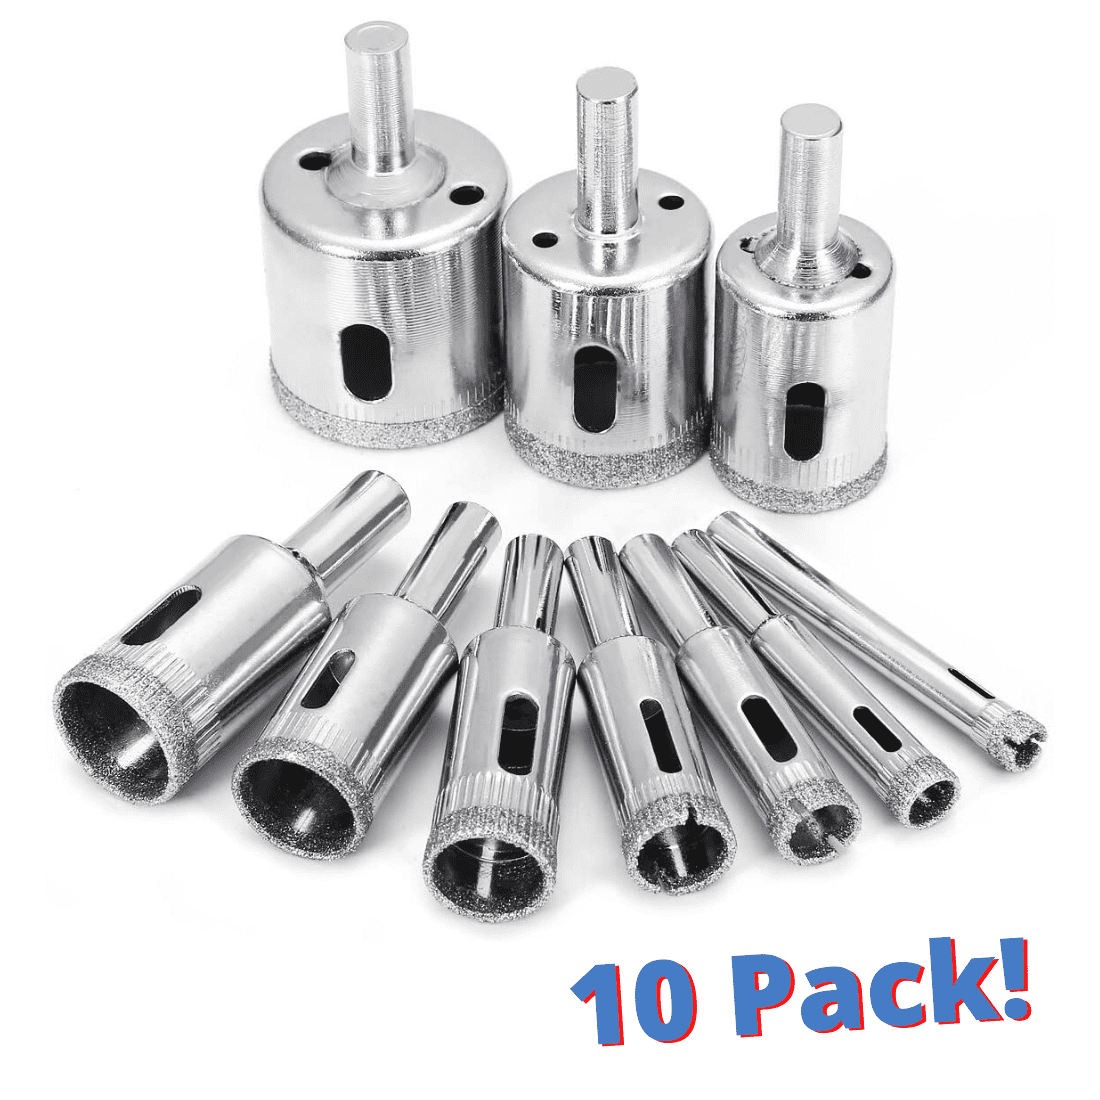 Pack of 10pcs Drill Bit Hole Saw 6MM Dia Cut Tool for Glass Tile Ceramic 